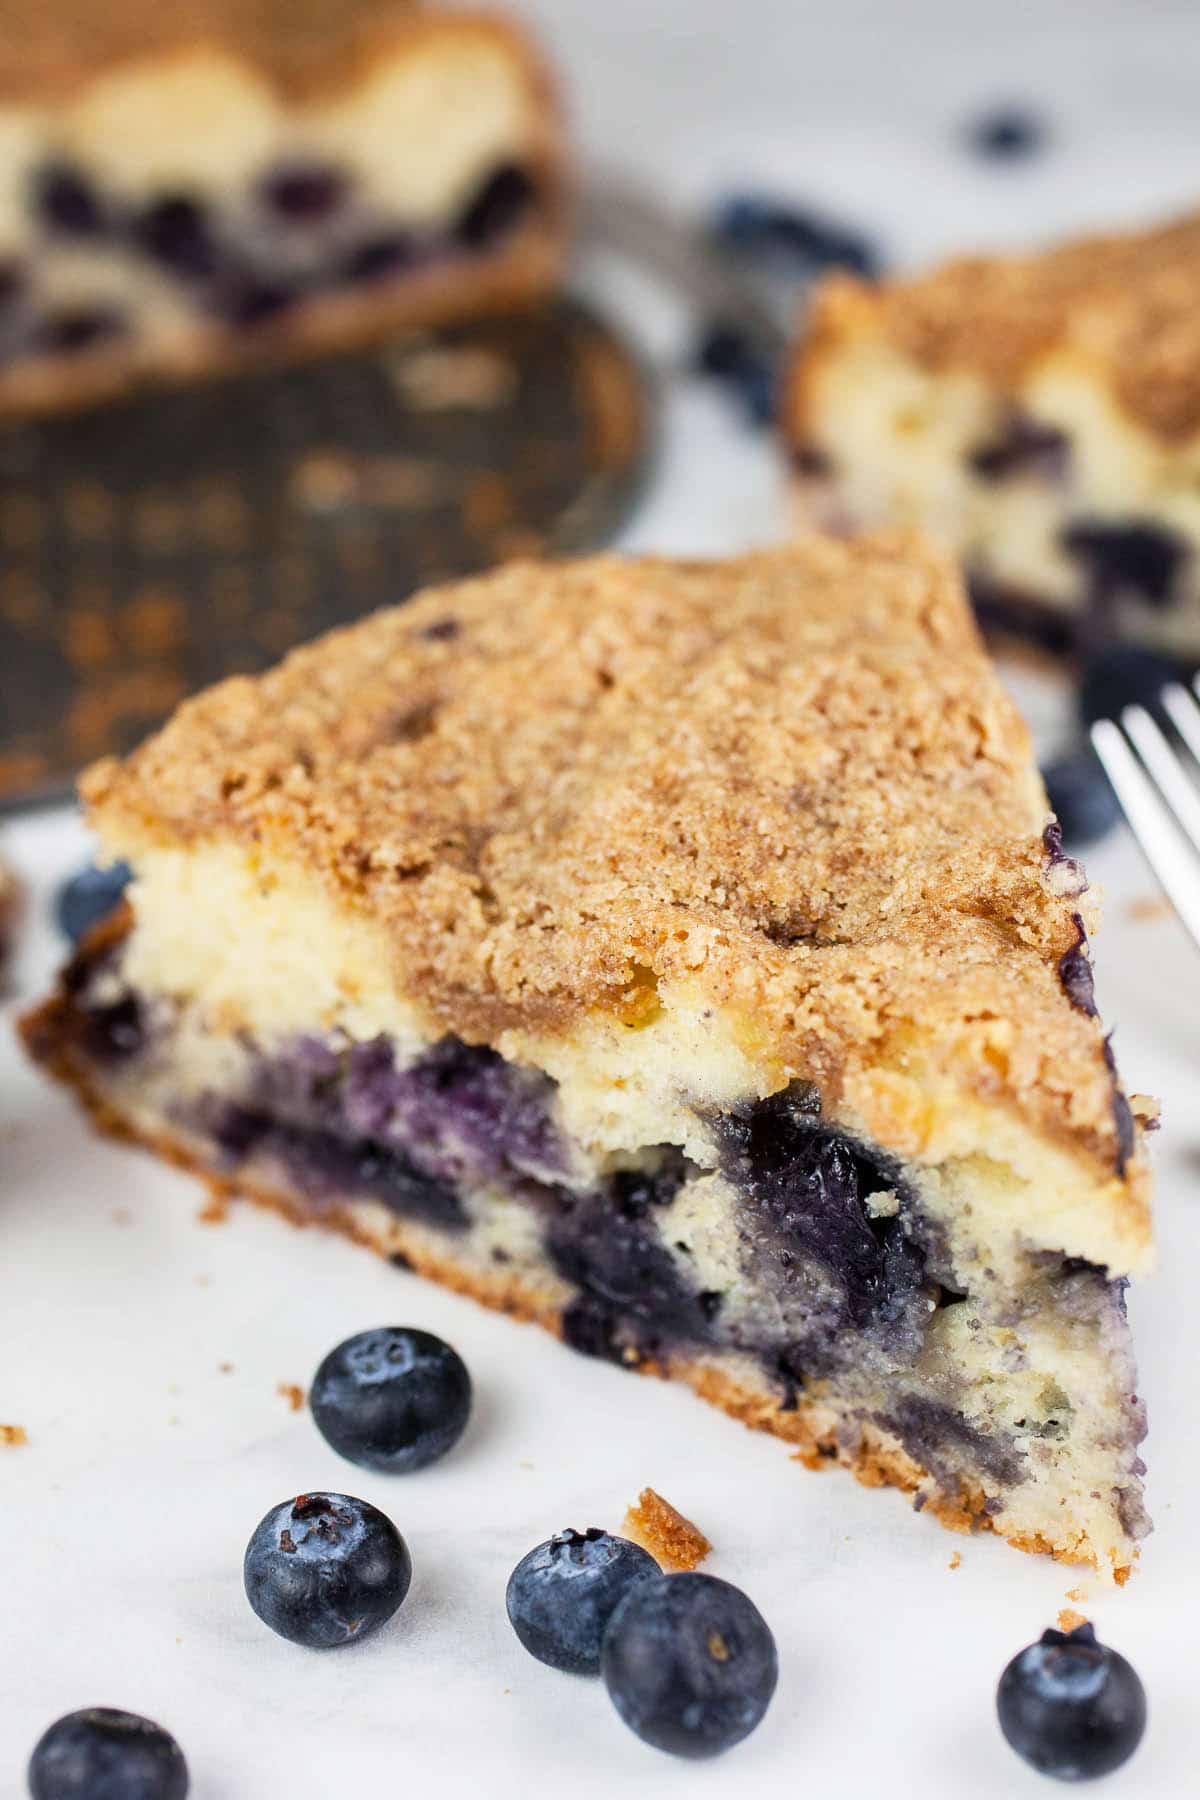 Blueberry buckle with streusel topping.